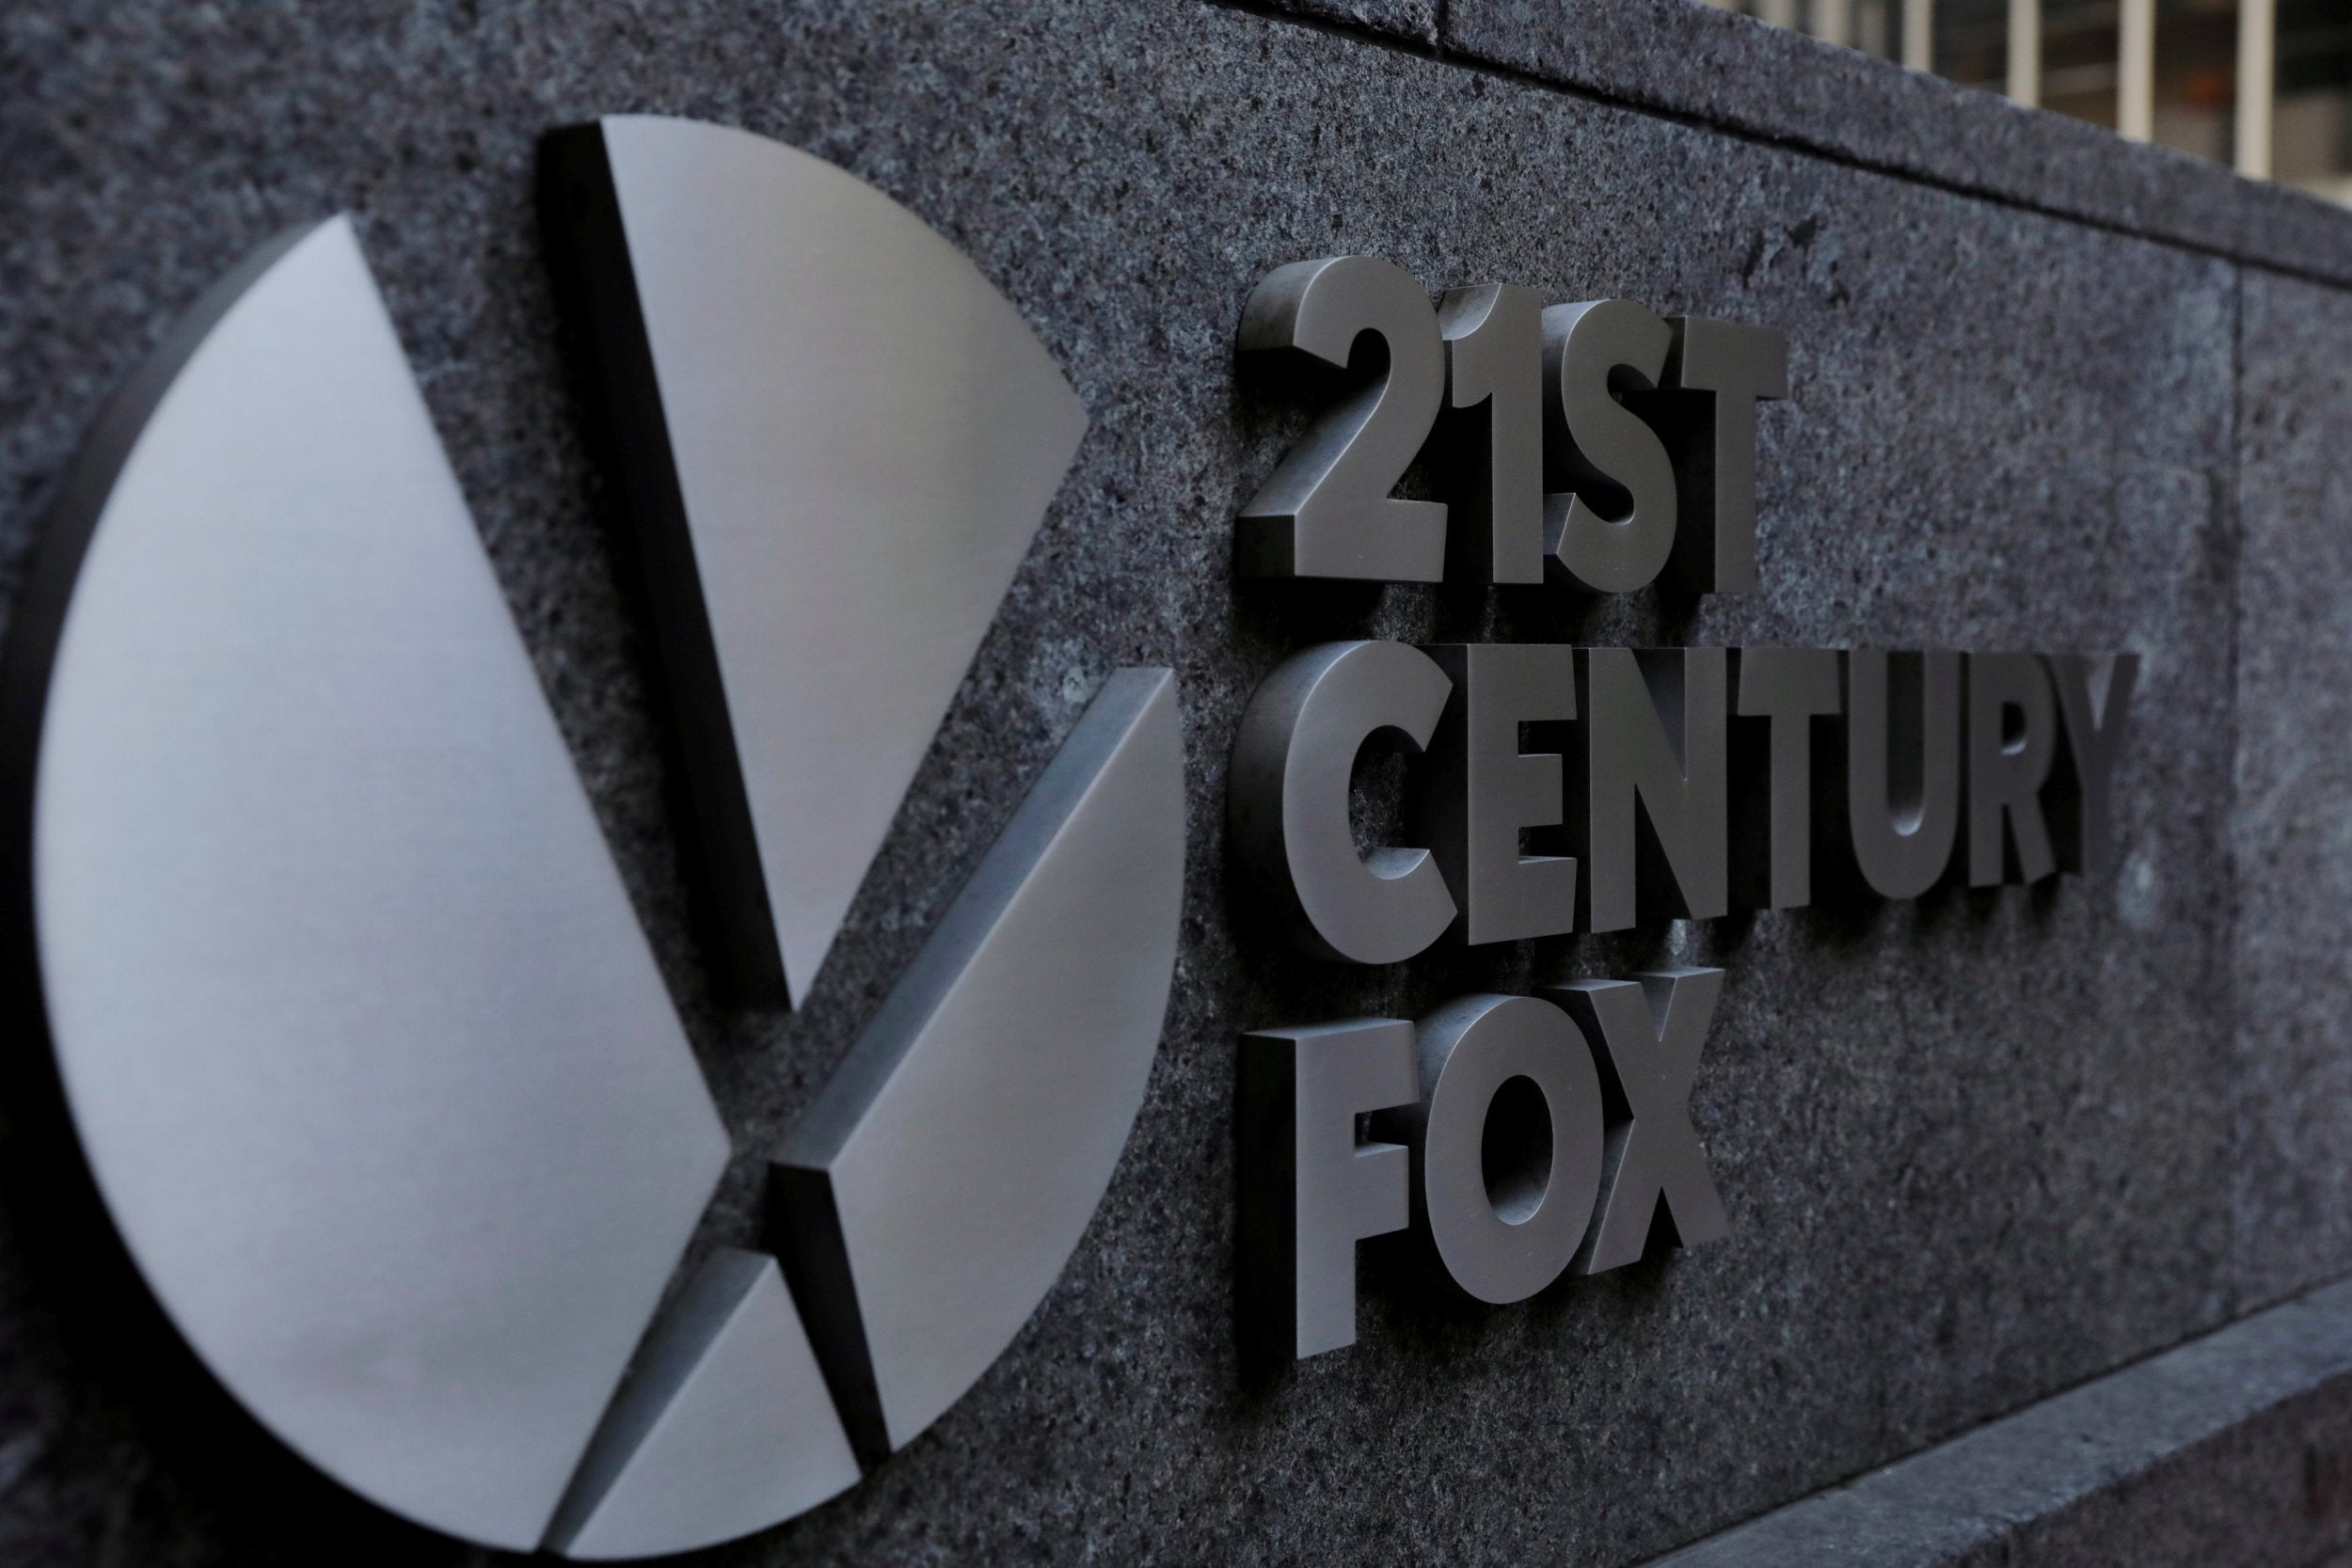 Fox is disposing of its stake in Sky